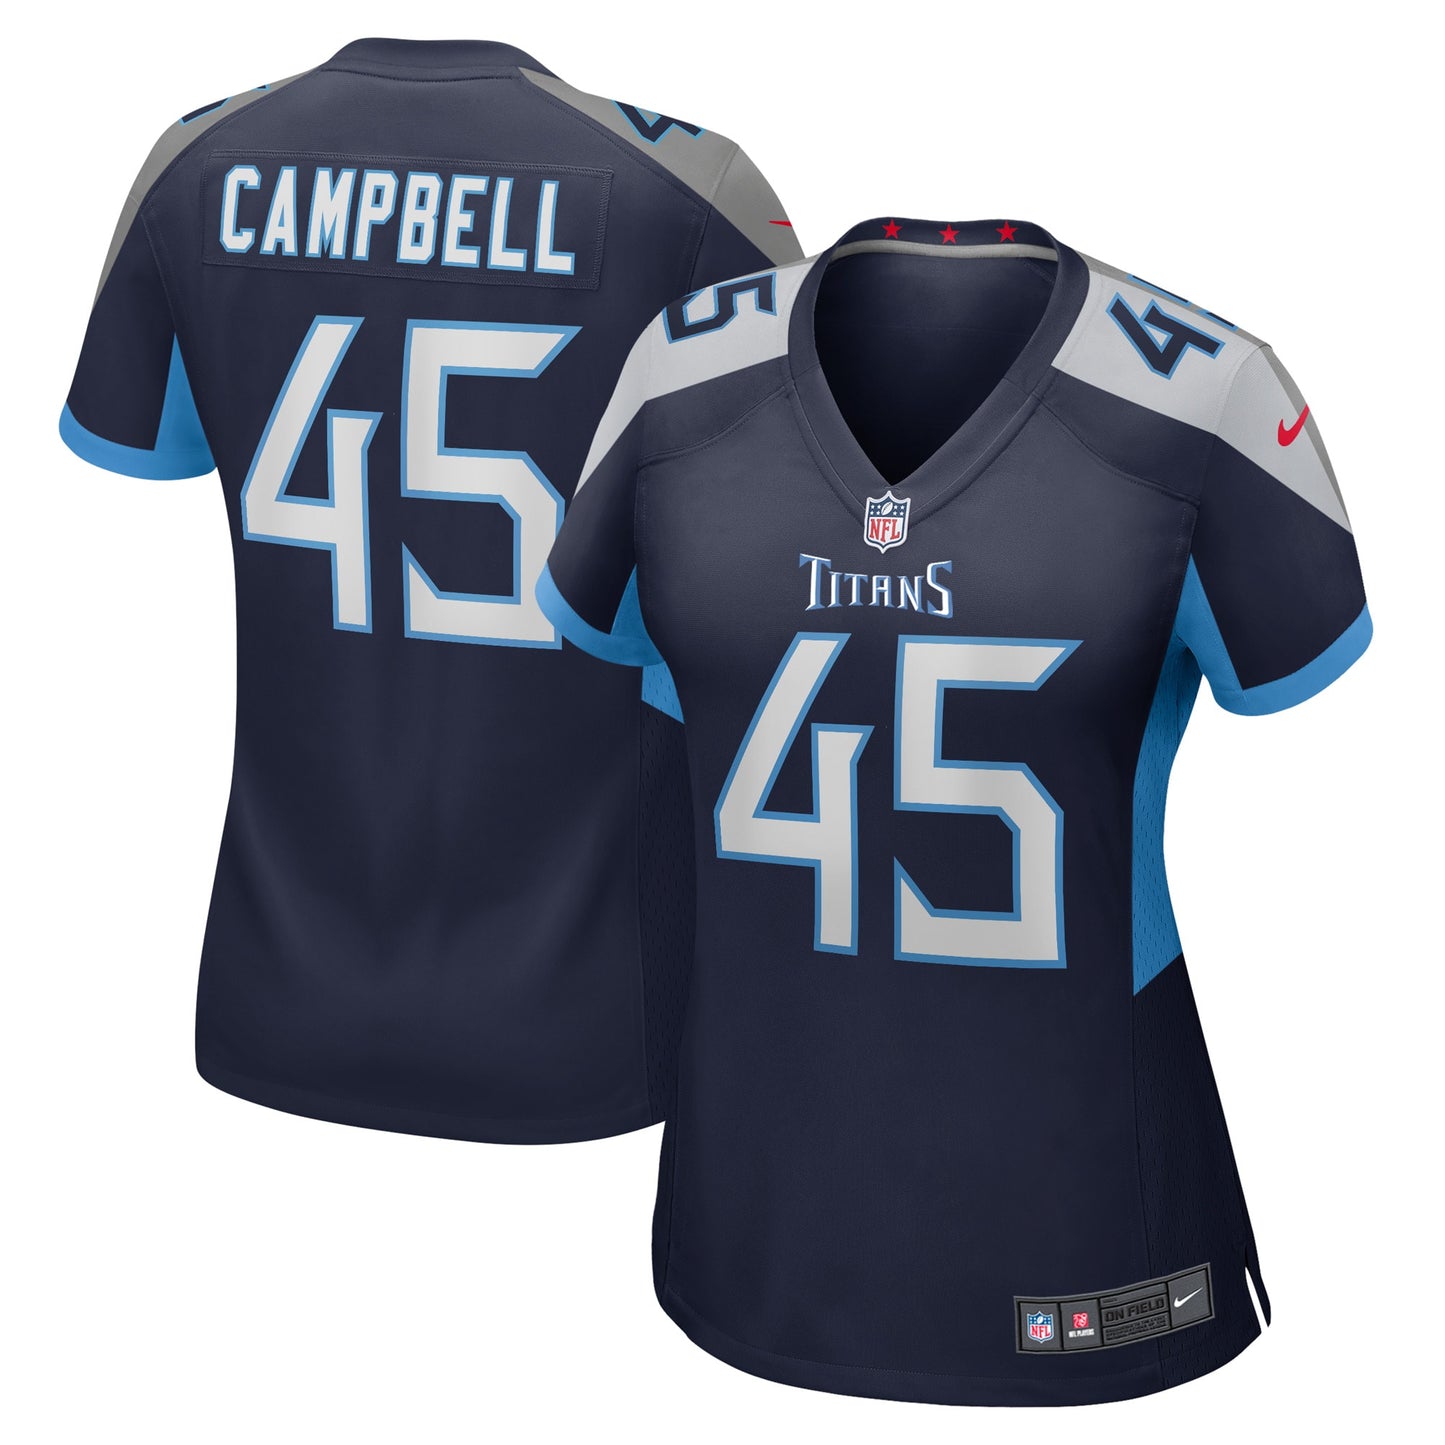 Chance Campbell Tennessee Titans Nike Women's Player Game Jersey - Navy